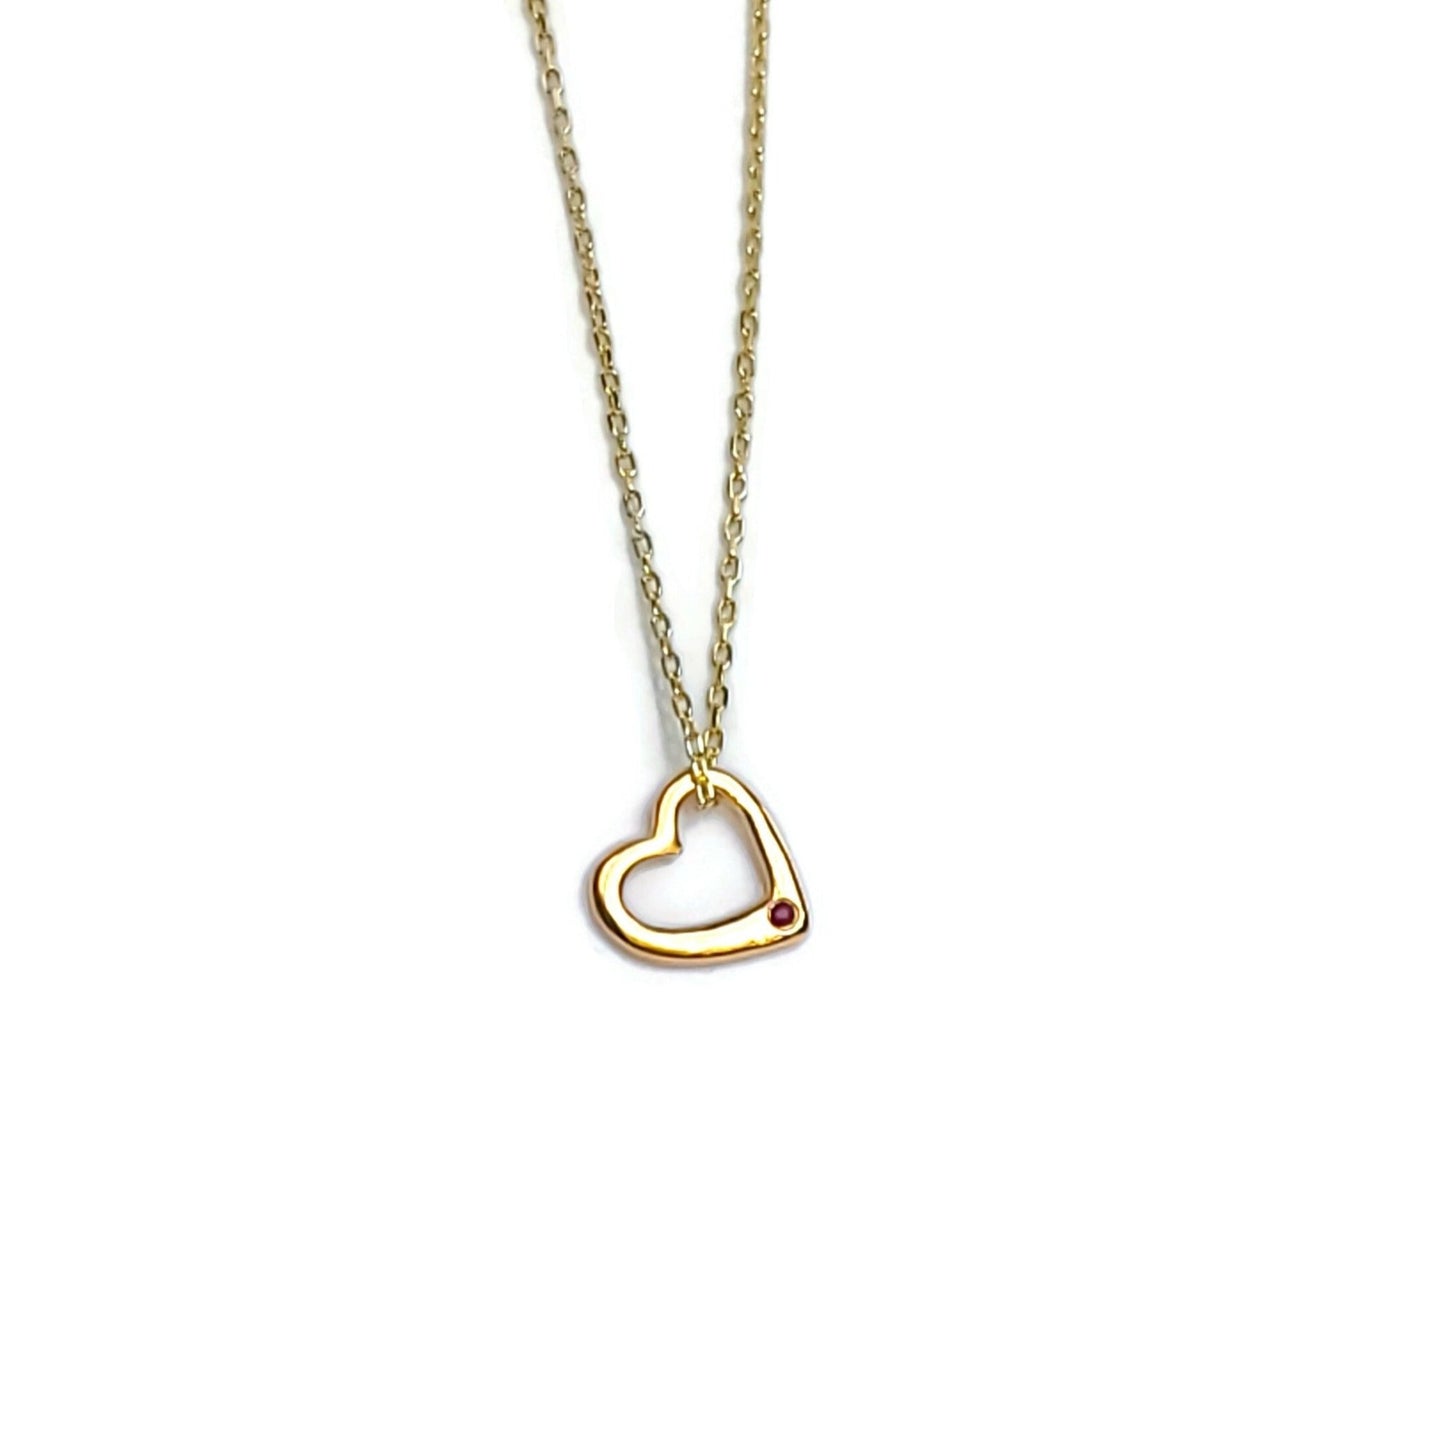 small gold heart pendant with ruby gemstone on gold necklace chain